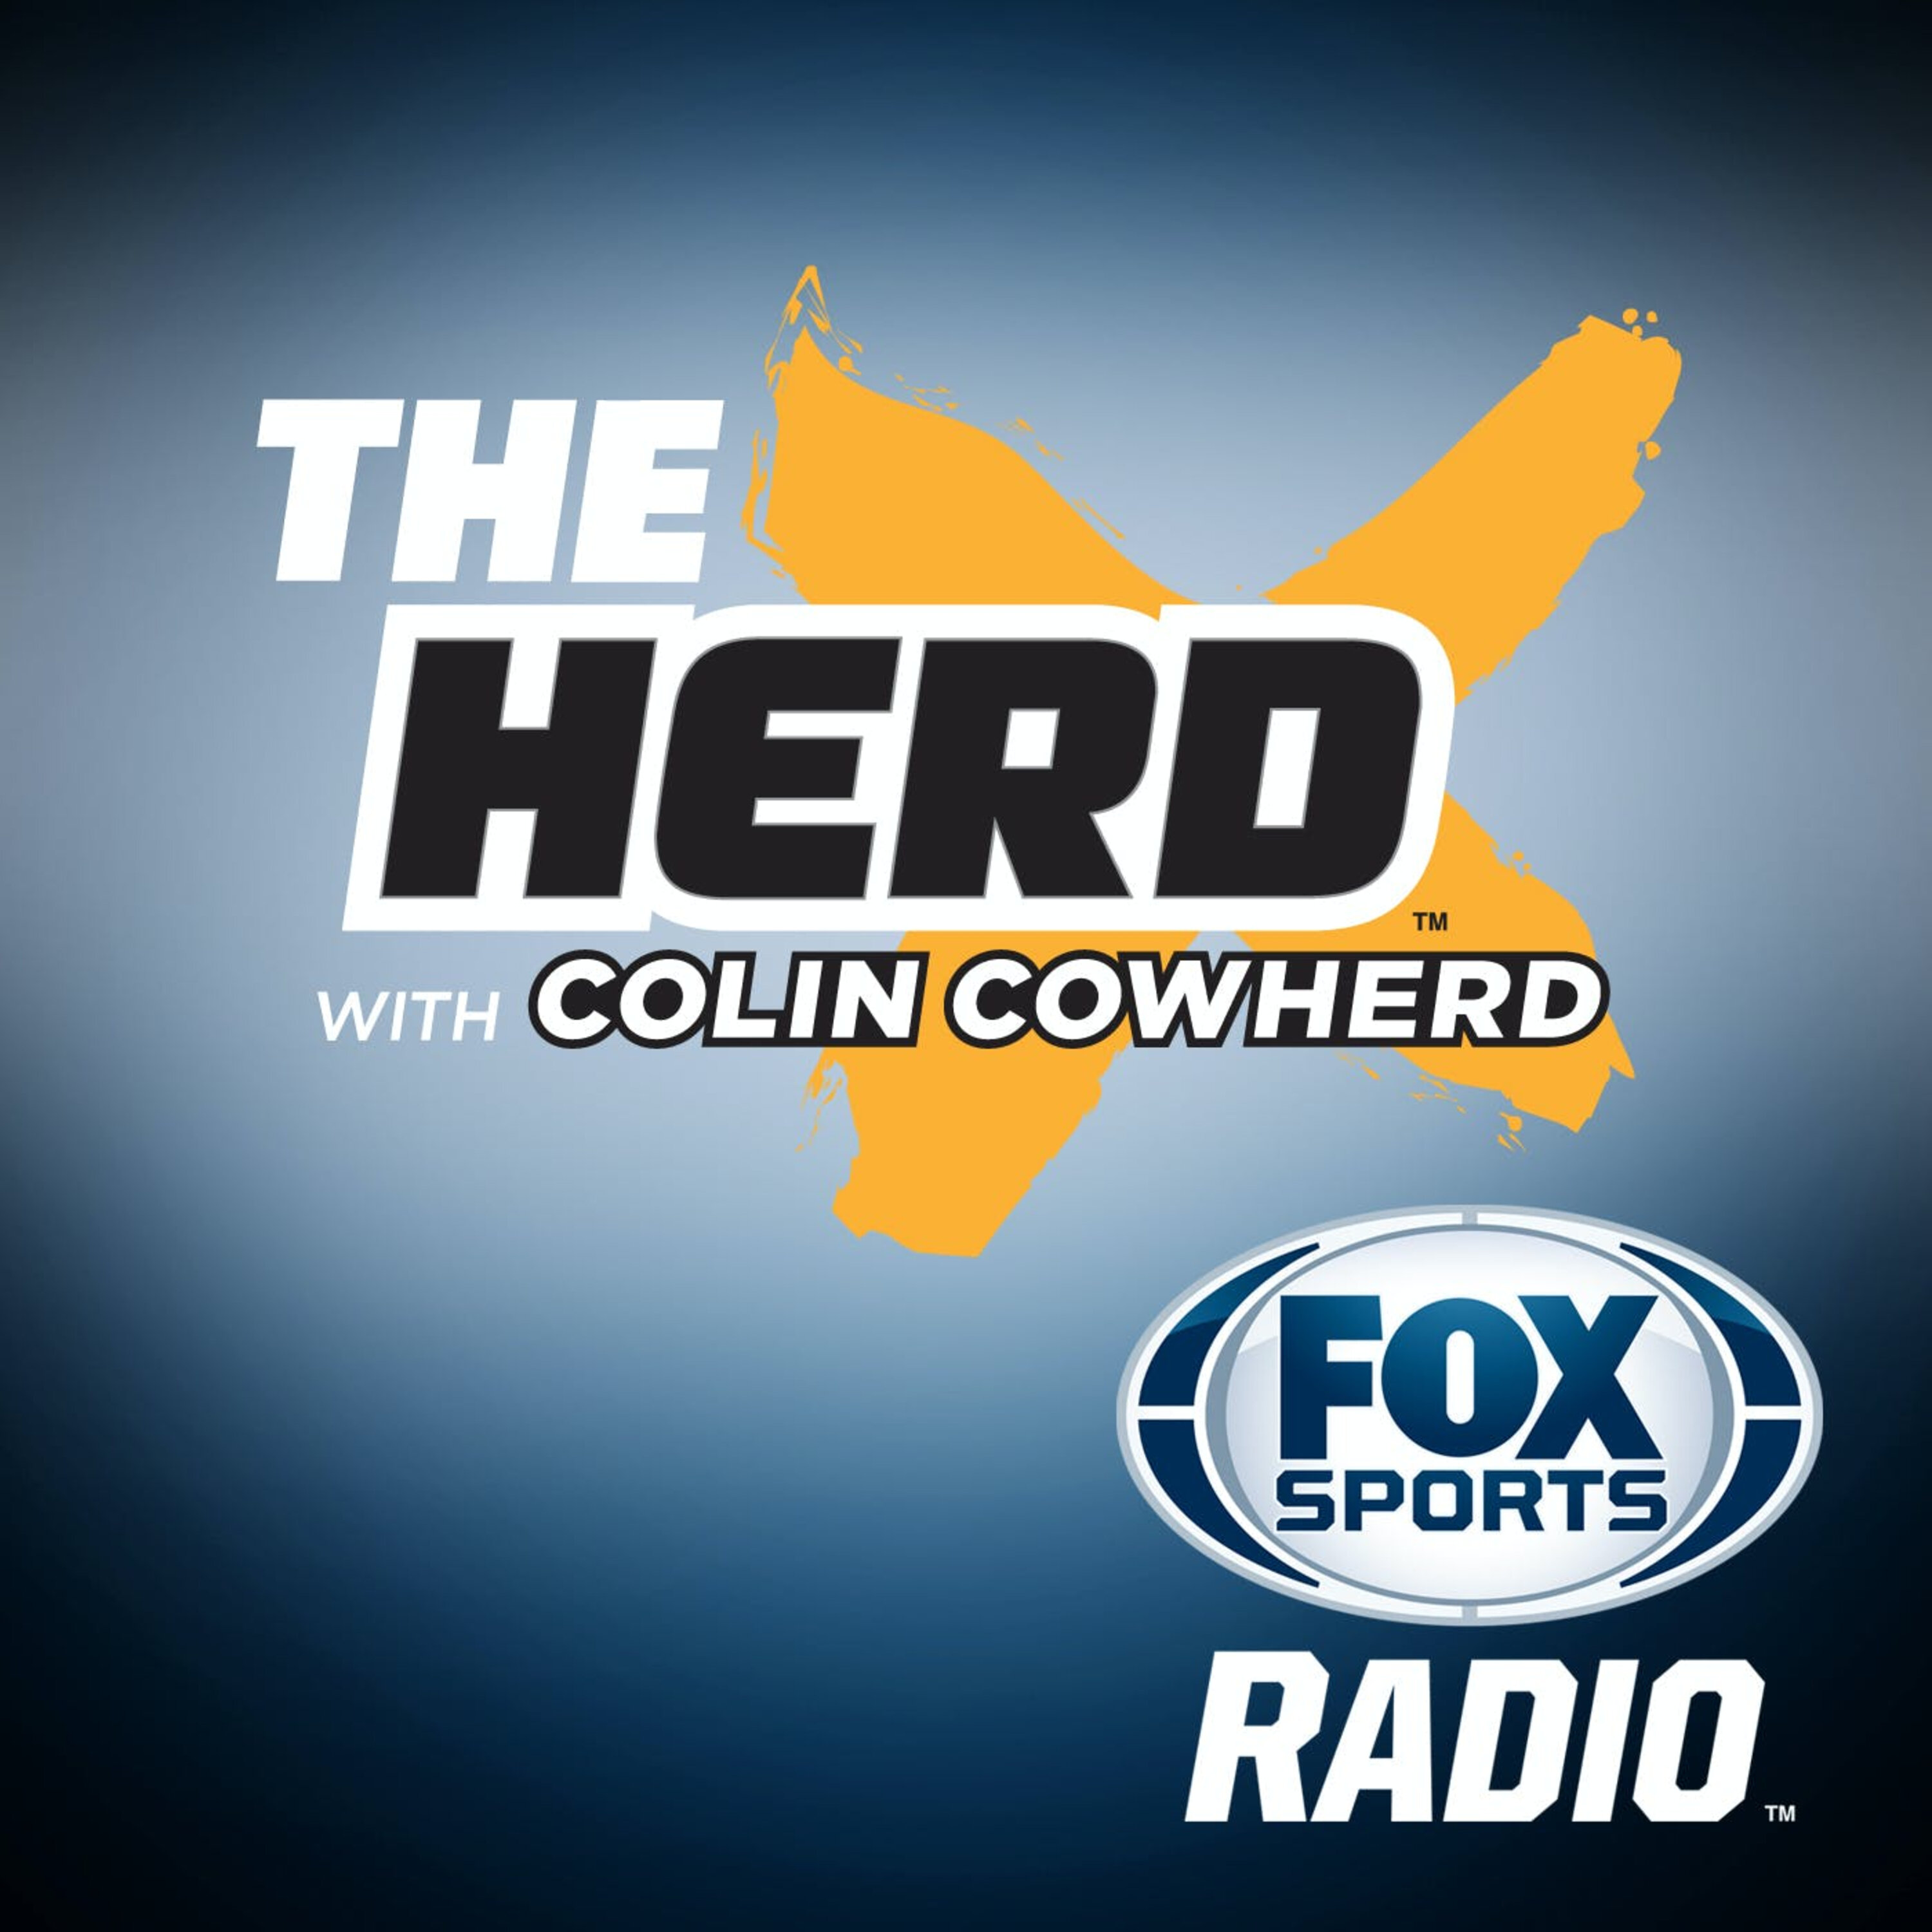 Steelers, Lakers, Le’Veon Bell, & the Herd Hierarchy